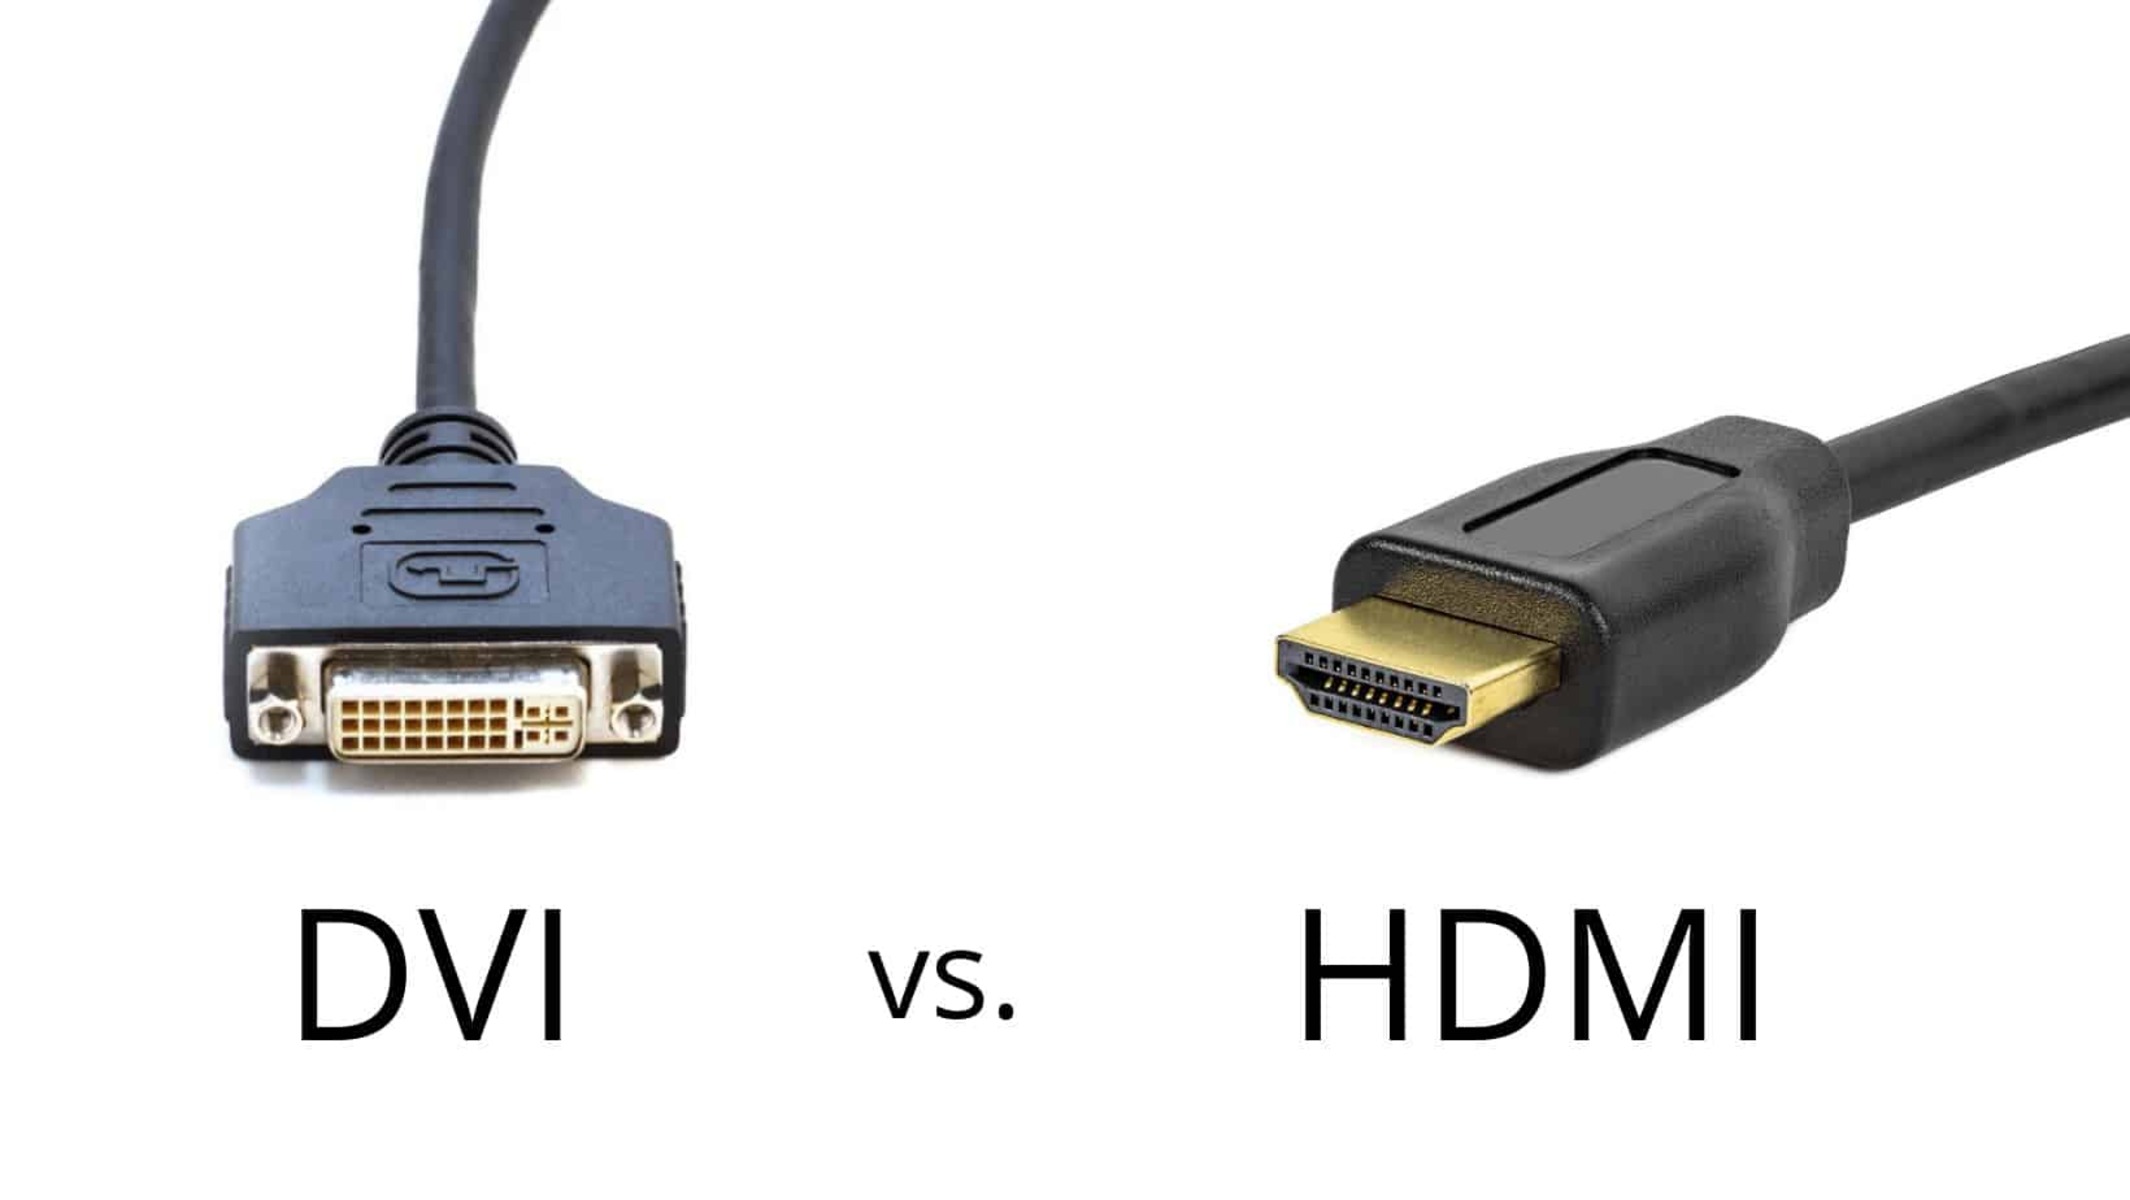 DVI Vs. HDMI: What’s The Difference?